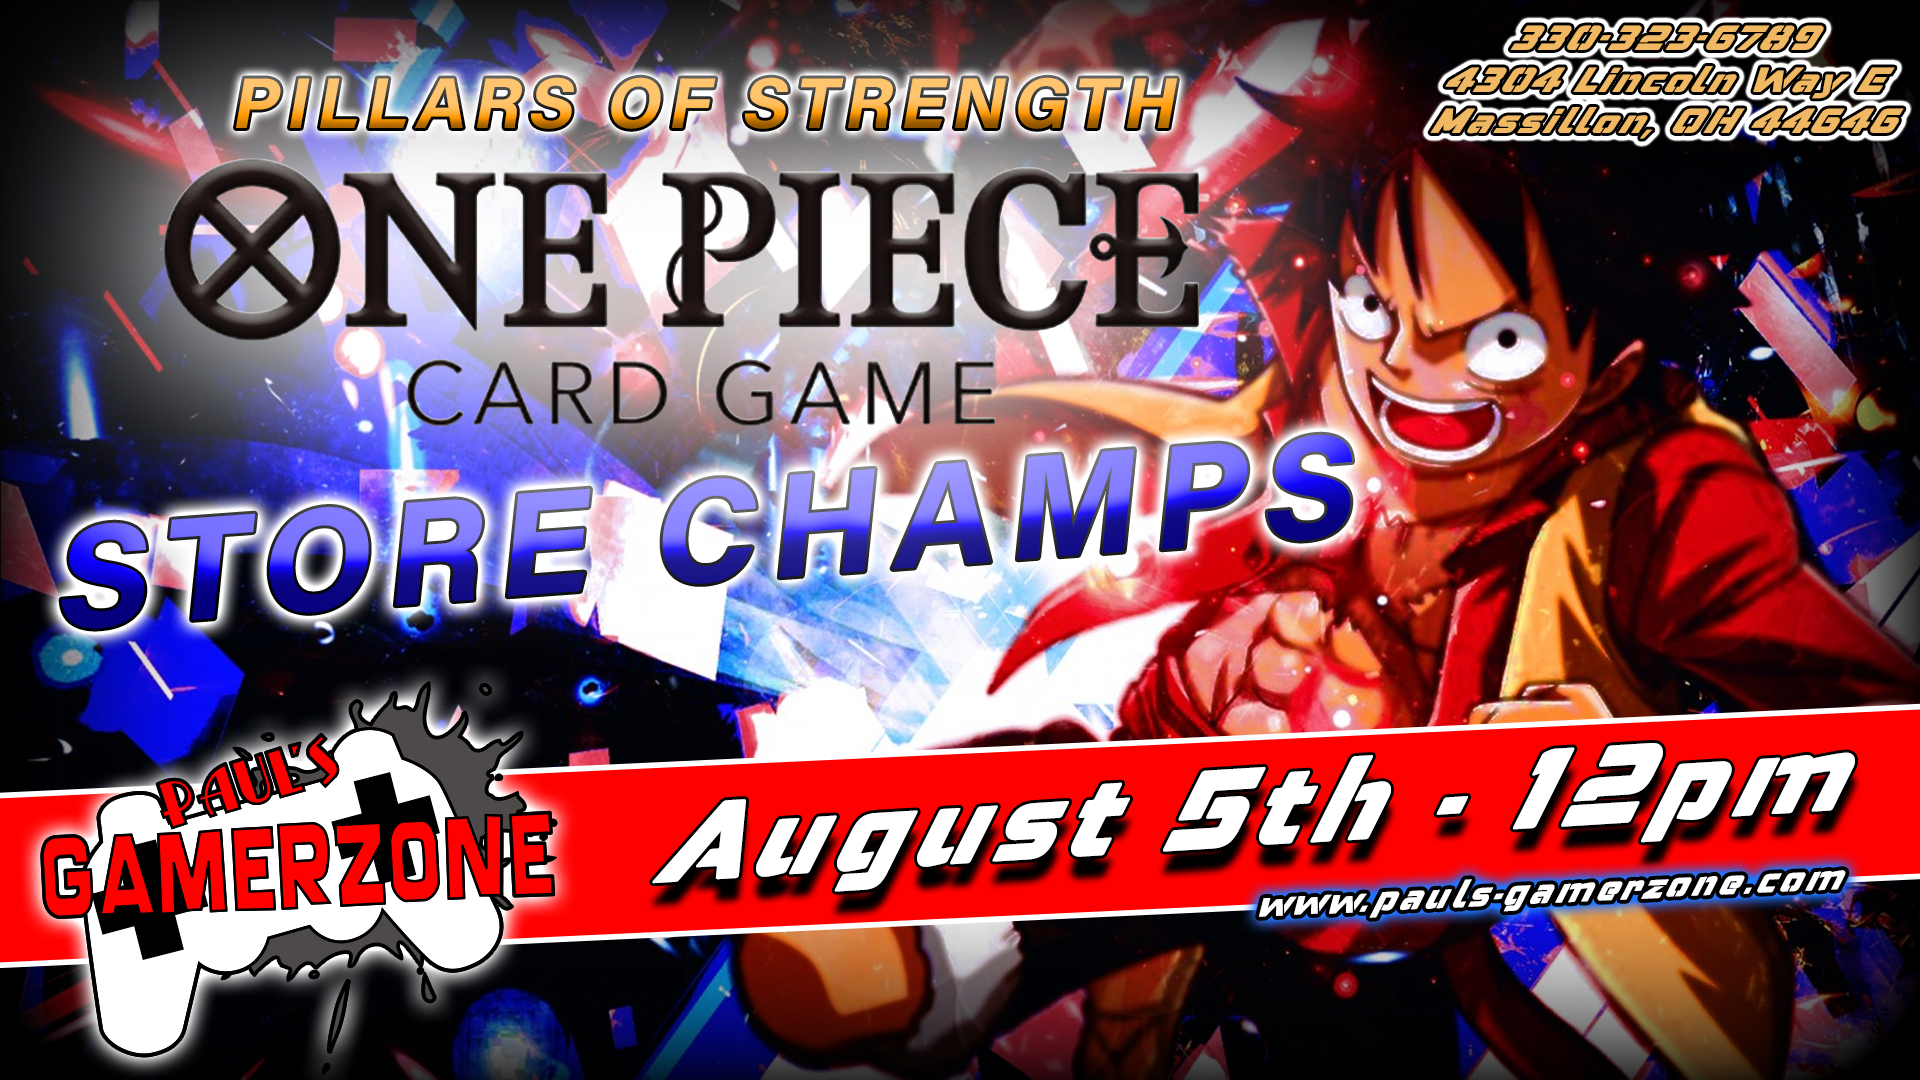 One Piece Store Championship!